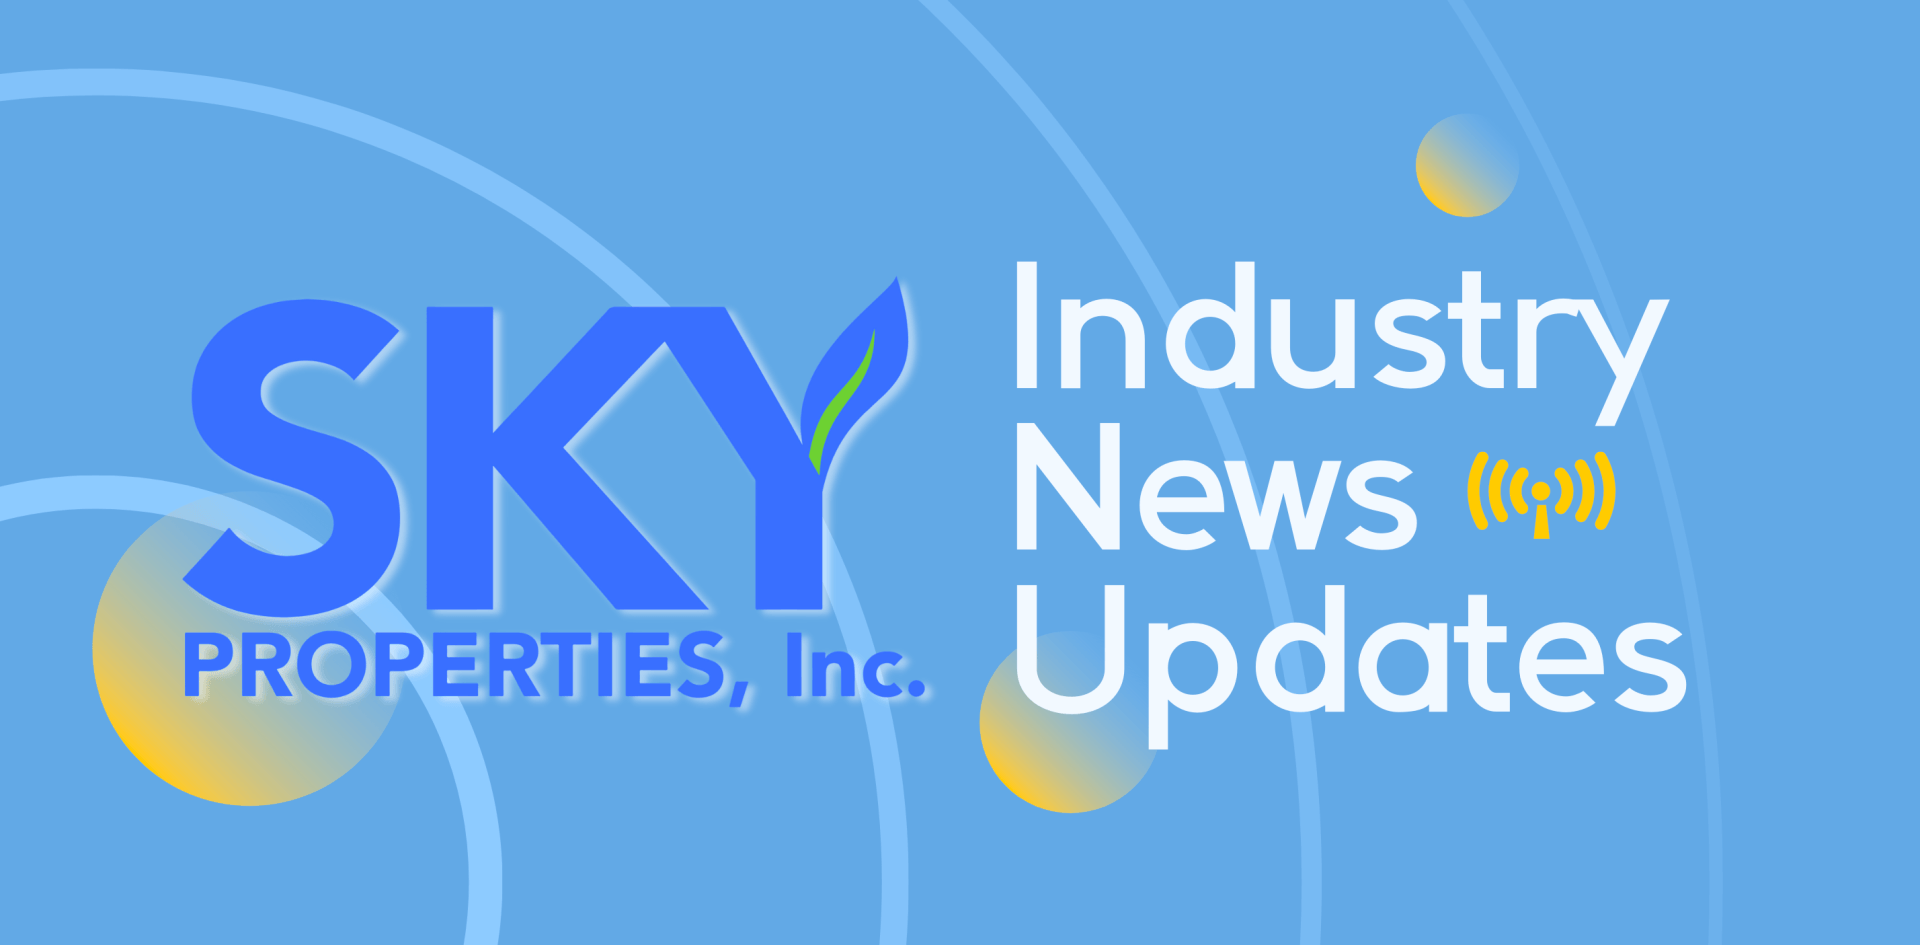 stylized article section title graphics about industry news and updates